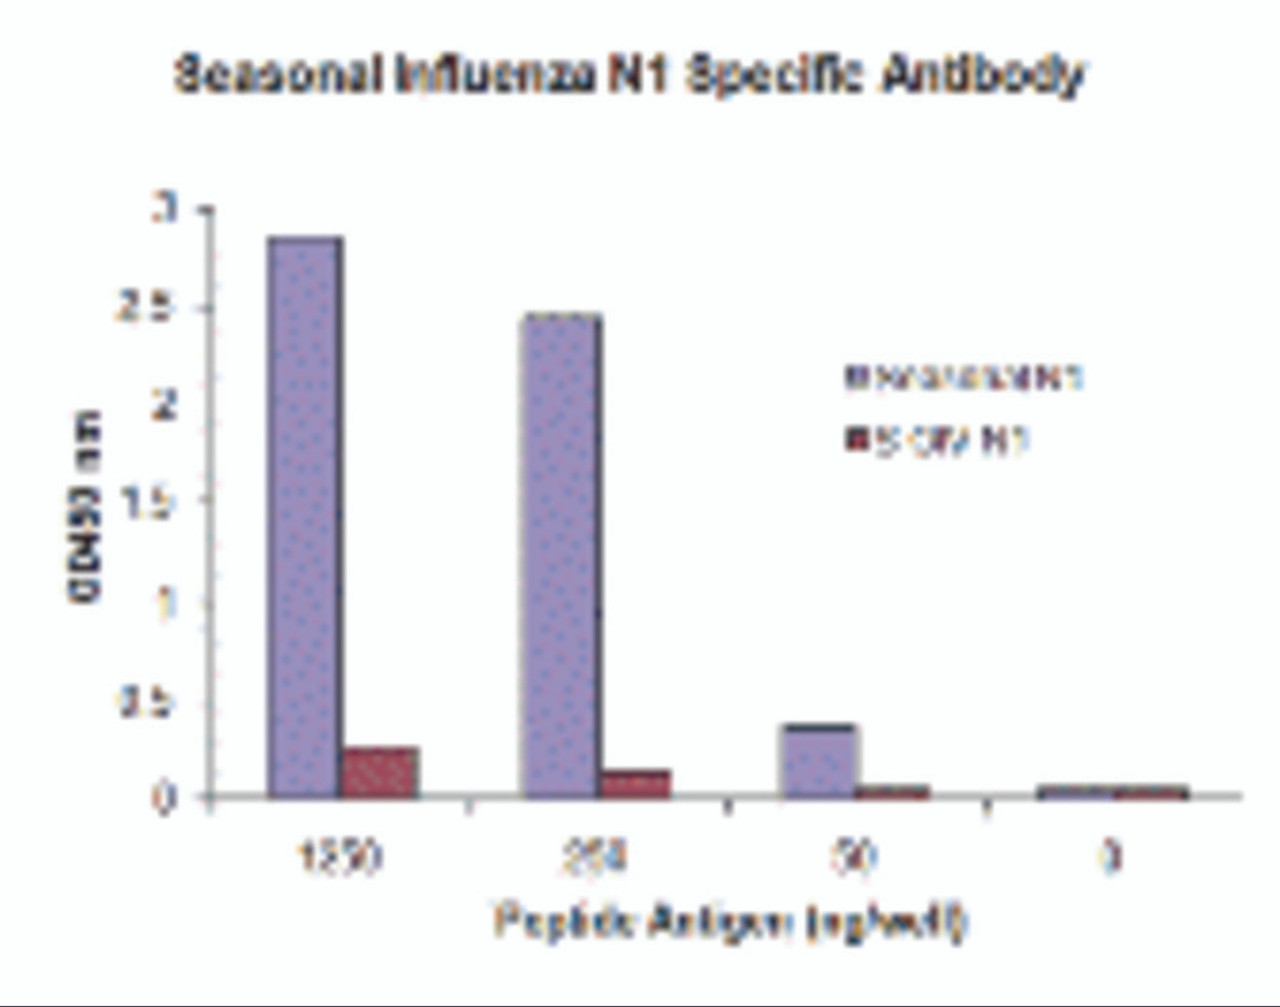 Seasonal influenza A N1 antibody (Cat. No. PM-5919) specifically recognizes seasonal (H1N1) N1, and does not cross-react with peptide corresponding to swine-origin influenza A (S-OIV, H1N1) N1 peptide, in ELISA.